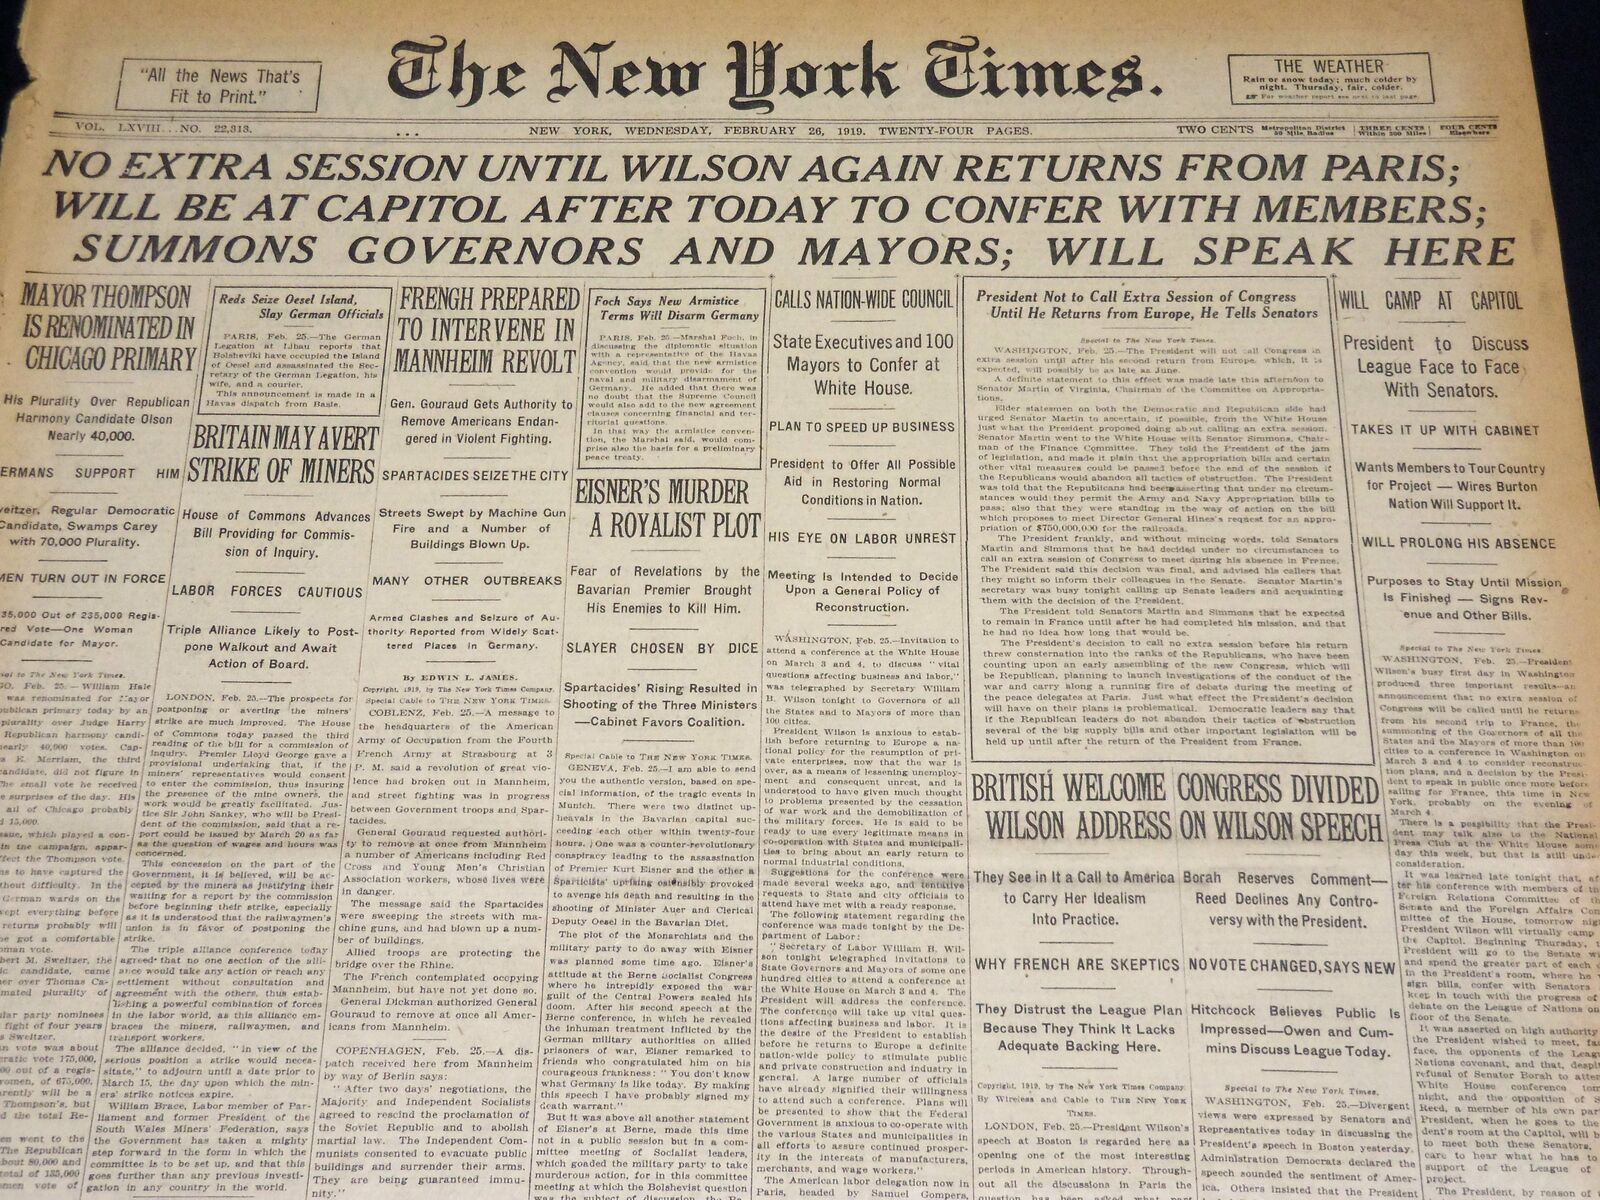 1919 FEBRUARY 26 NEW YORK TIMES - NO EXTRA SESSION UNTIL WILSON RETURNS- NT 7969